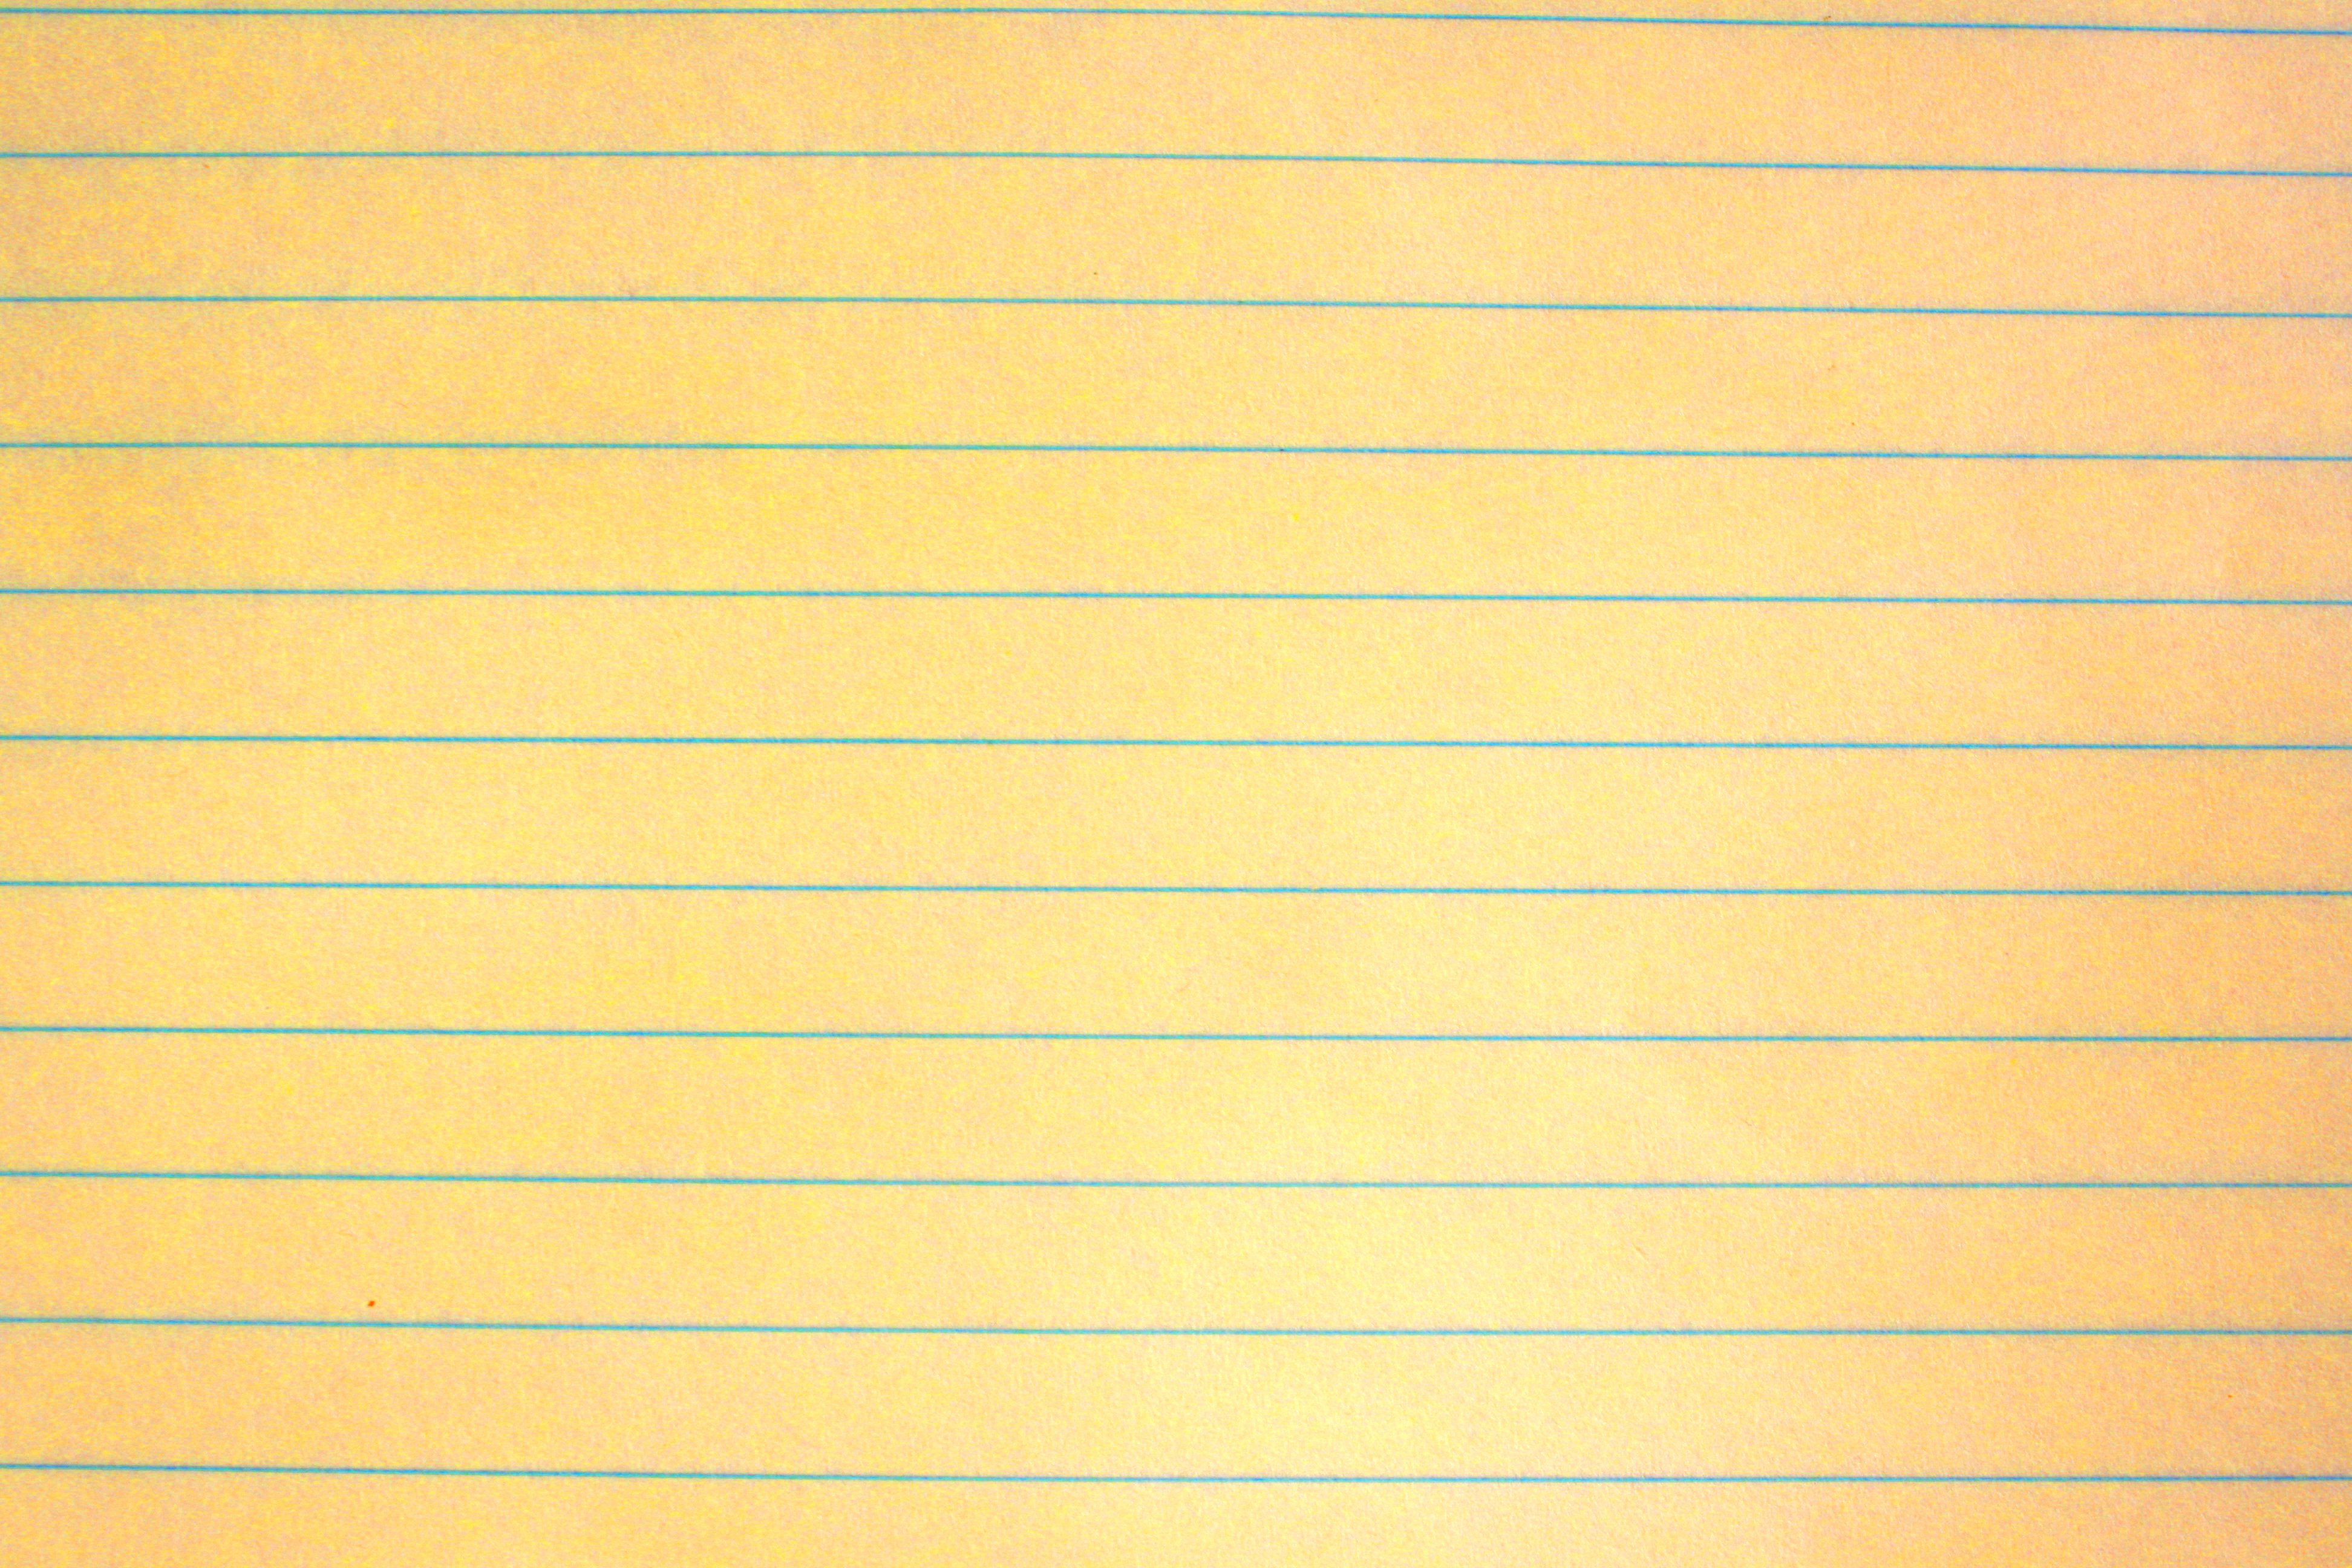 yellow lined paper texture